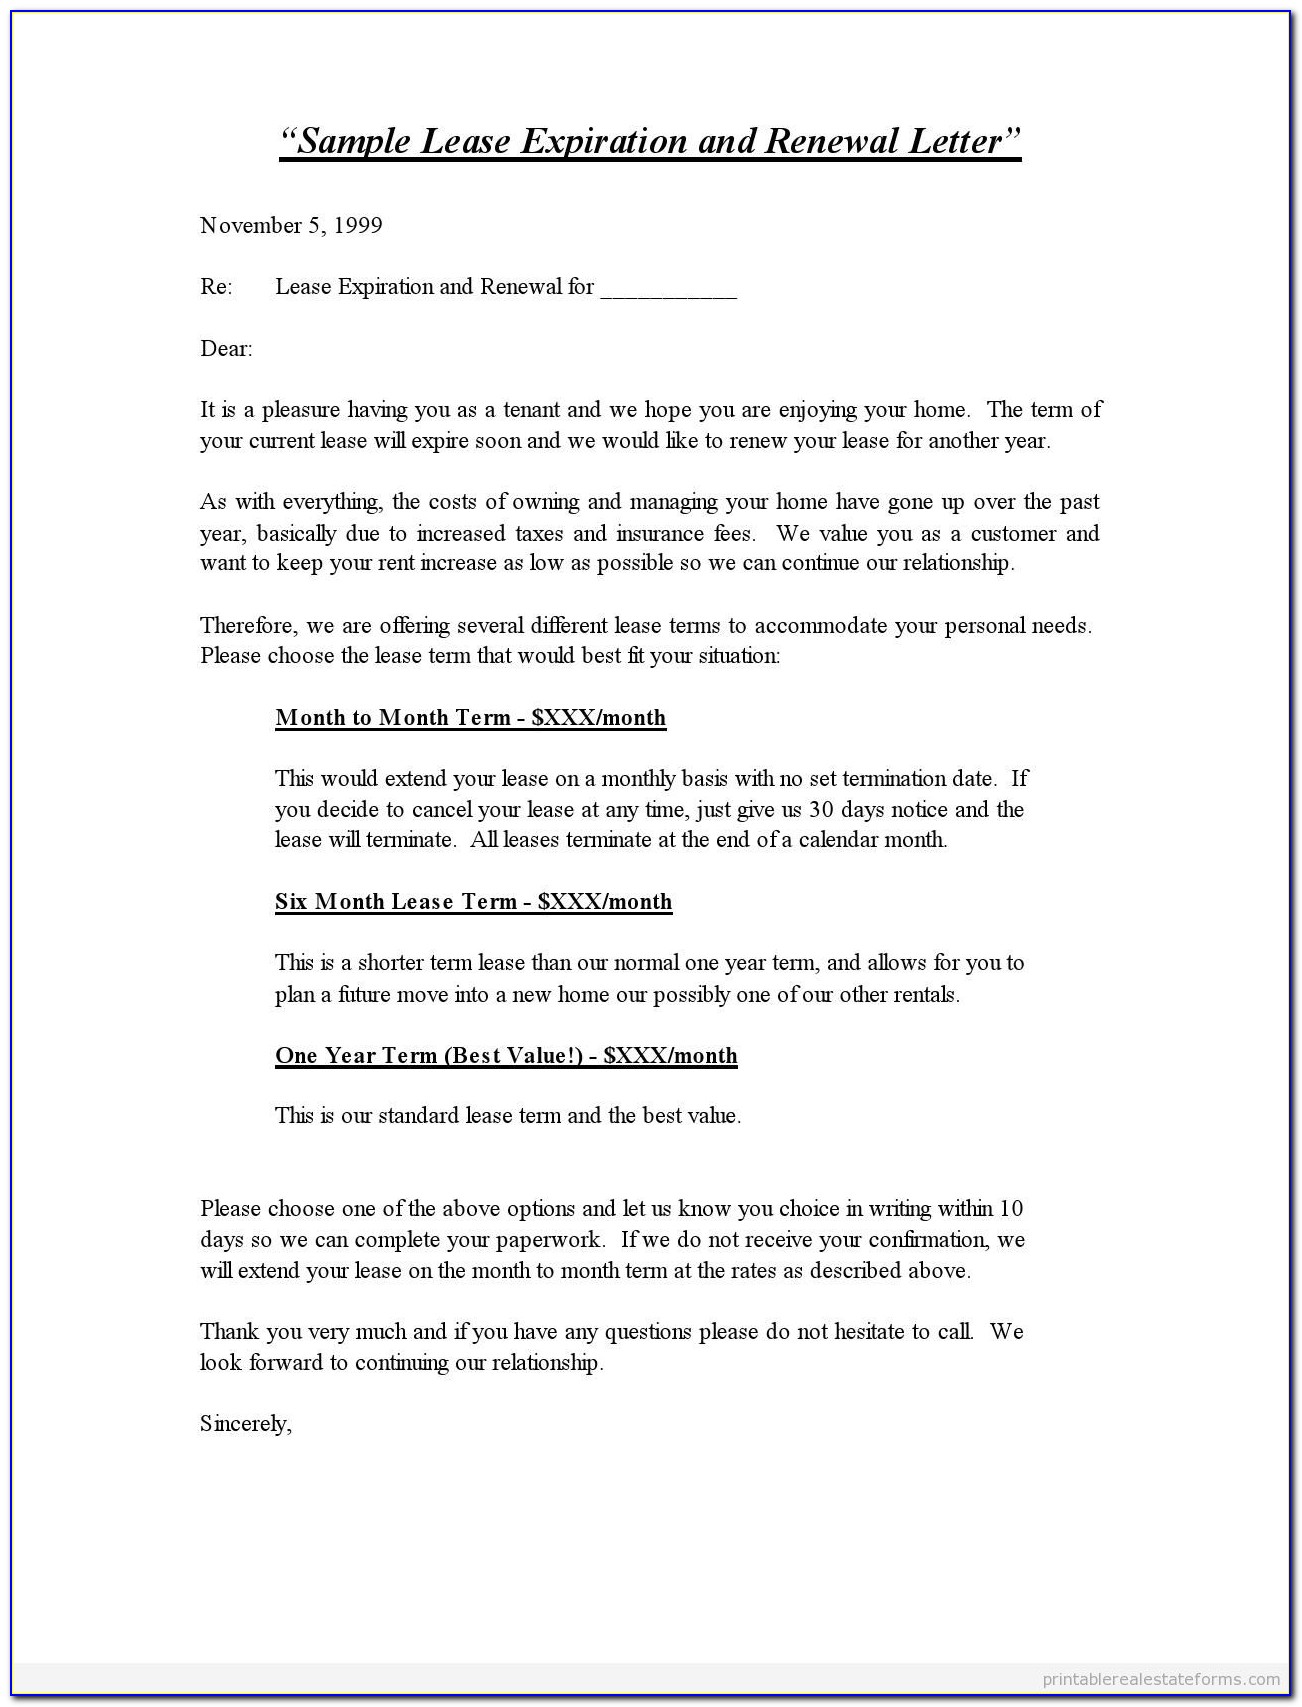 Lease Renewal Agreement Template